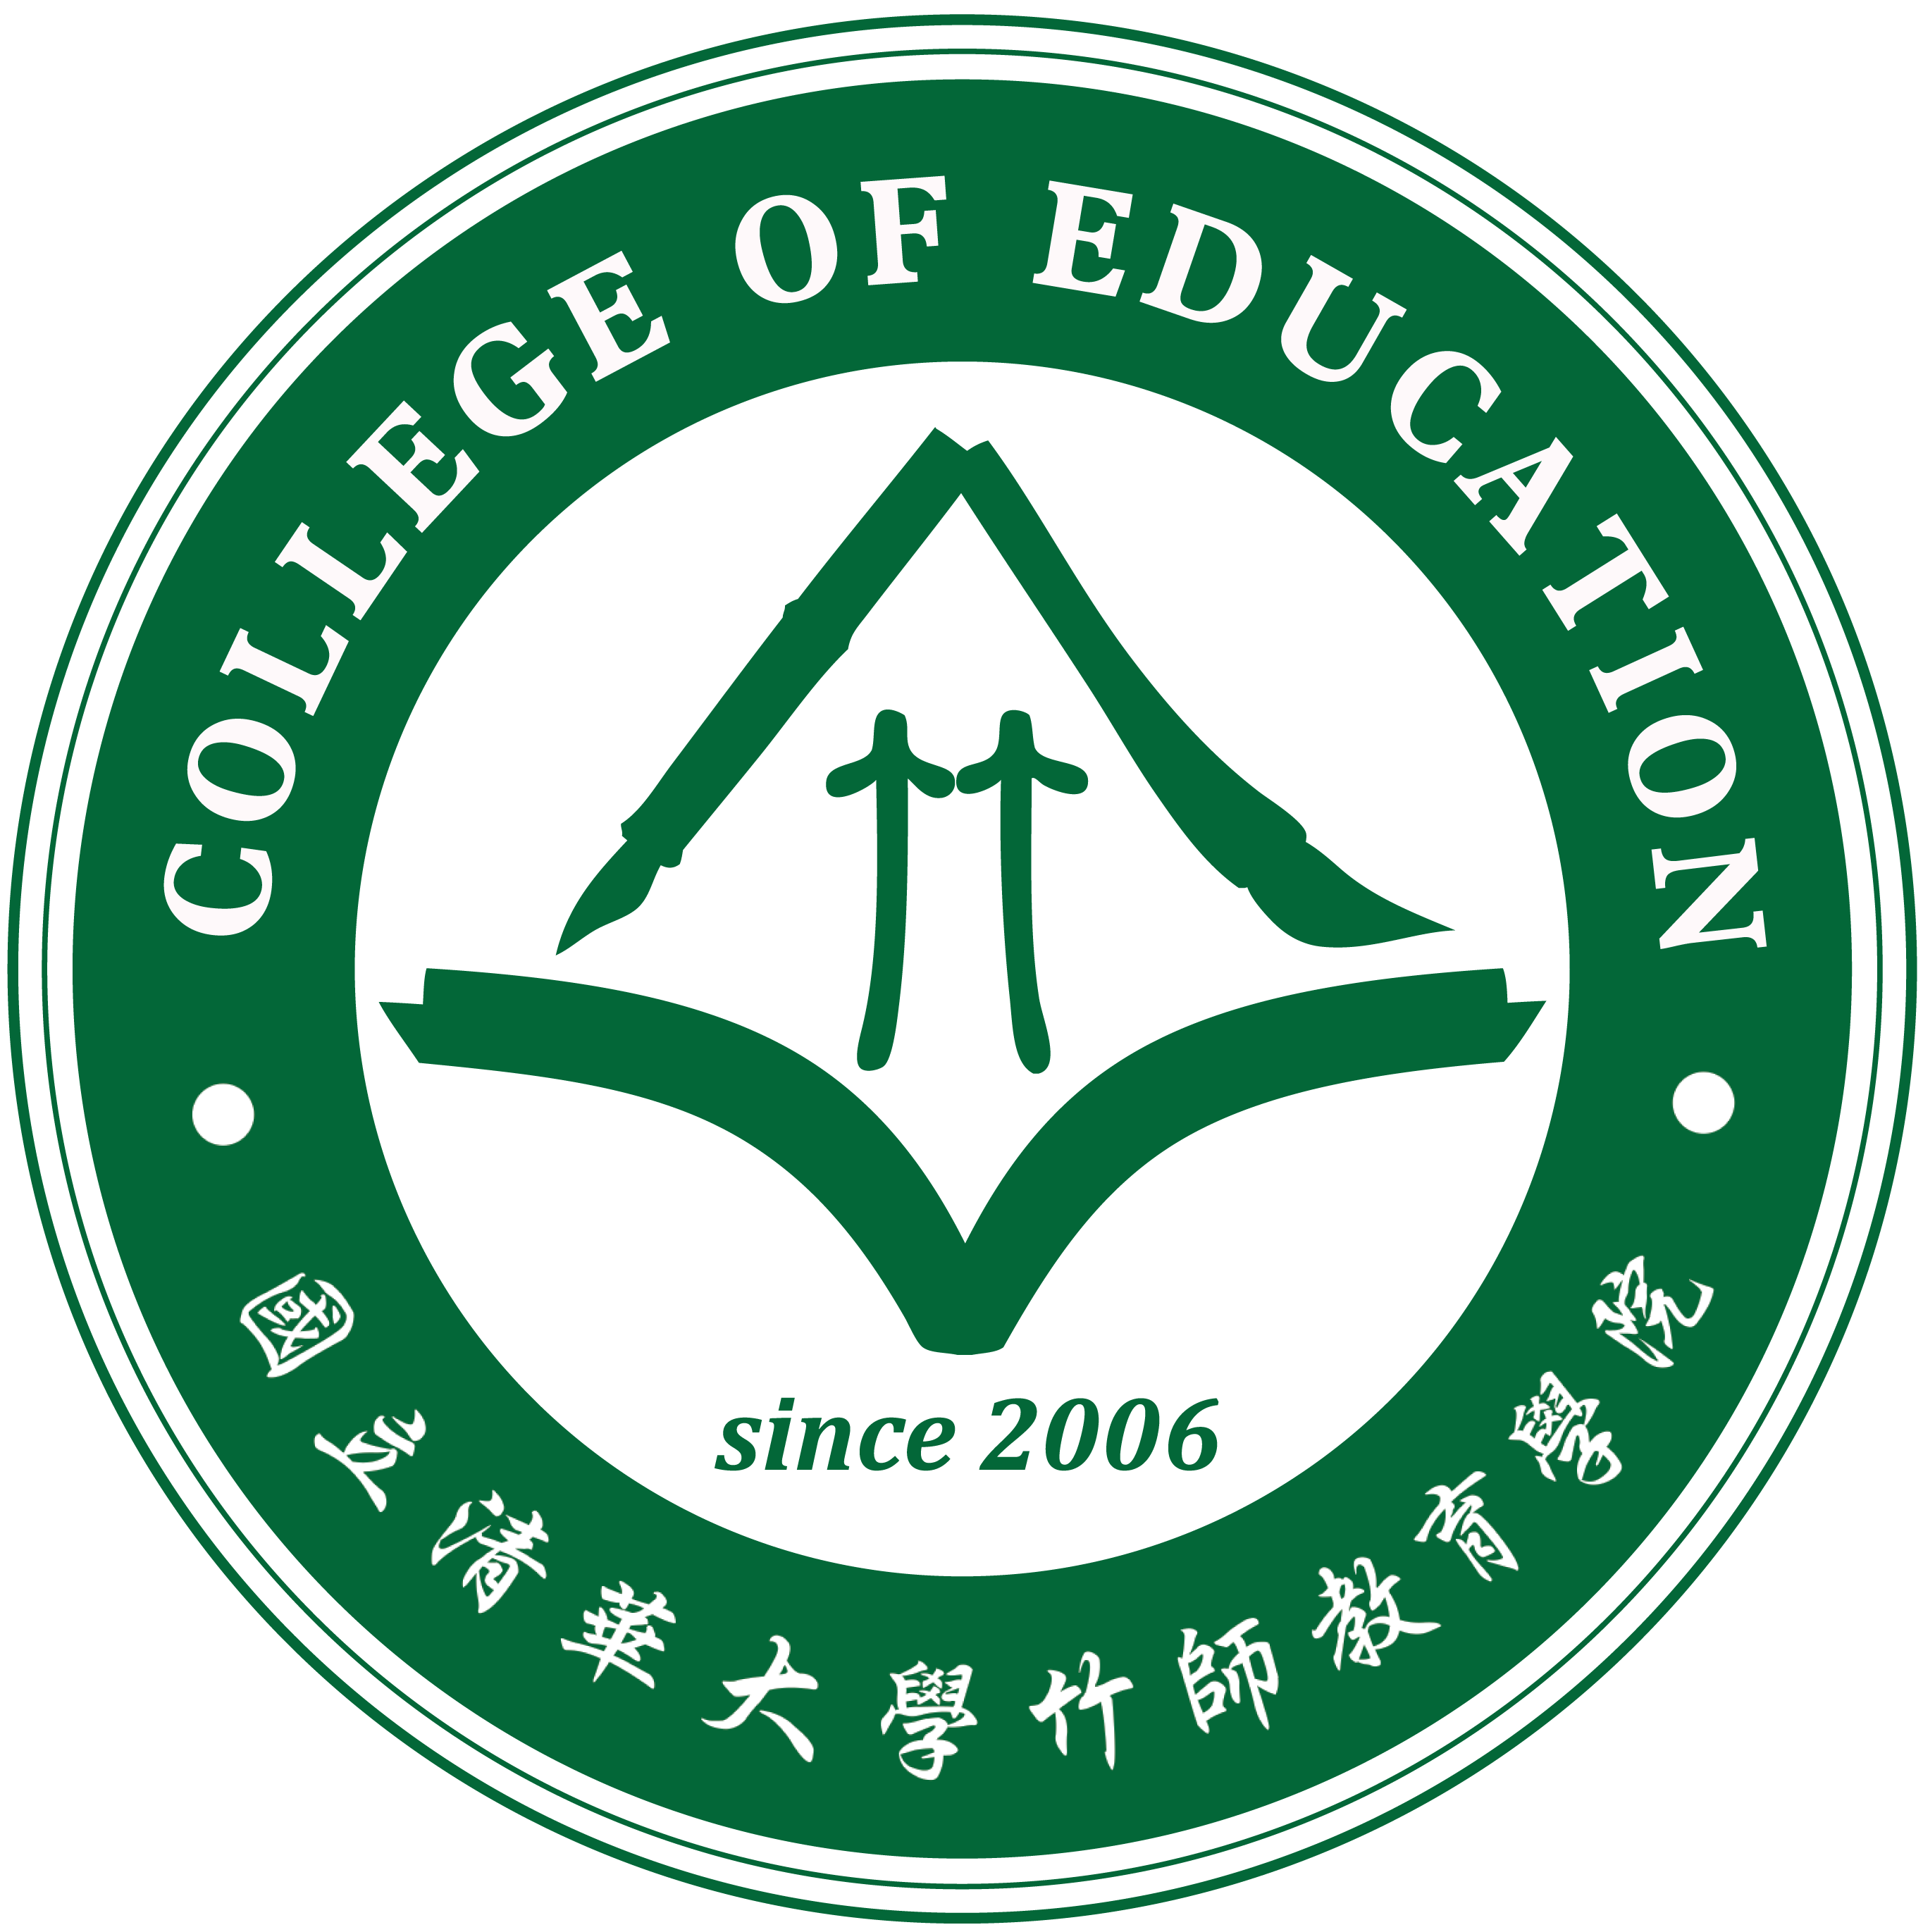 College of Education(Open new window)